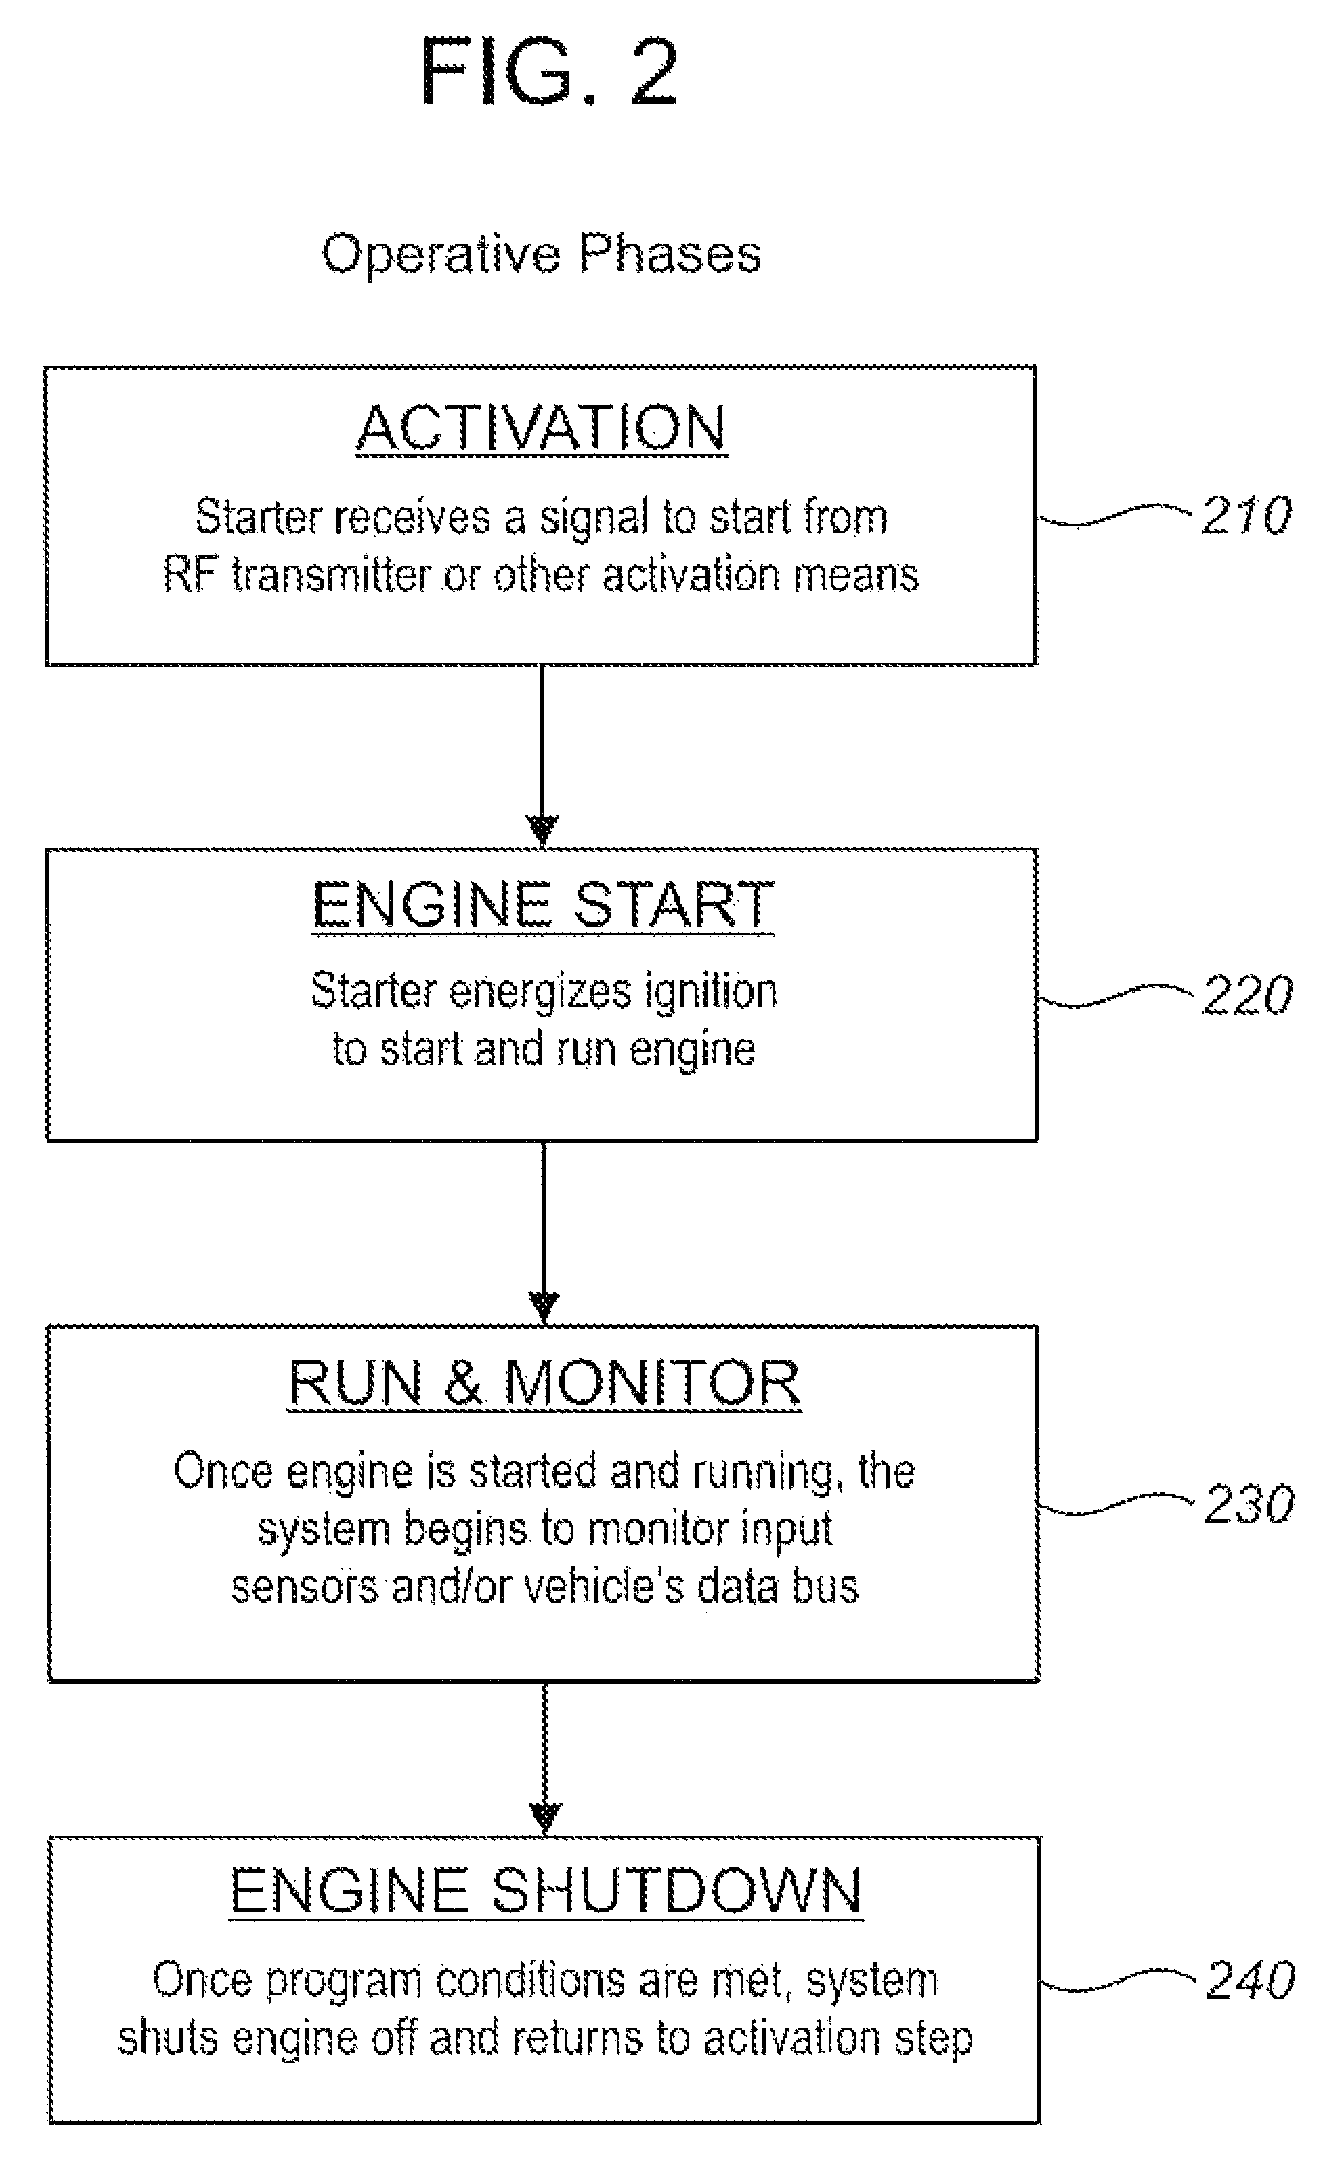 Method and system for regulating emissions from idling motor vehicles